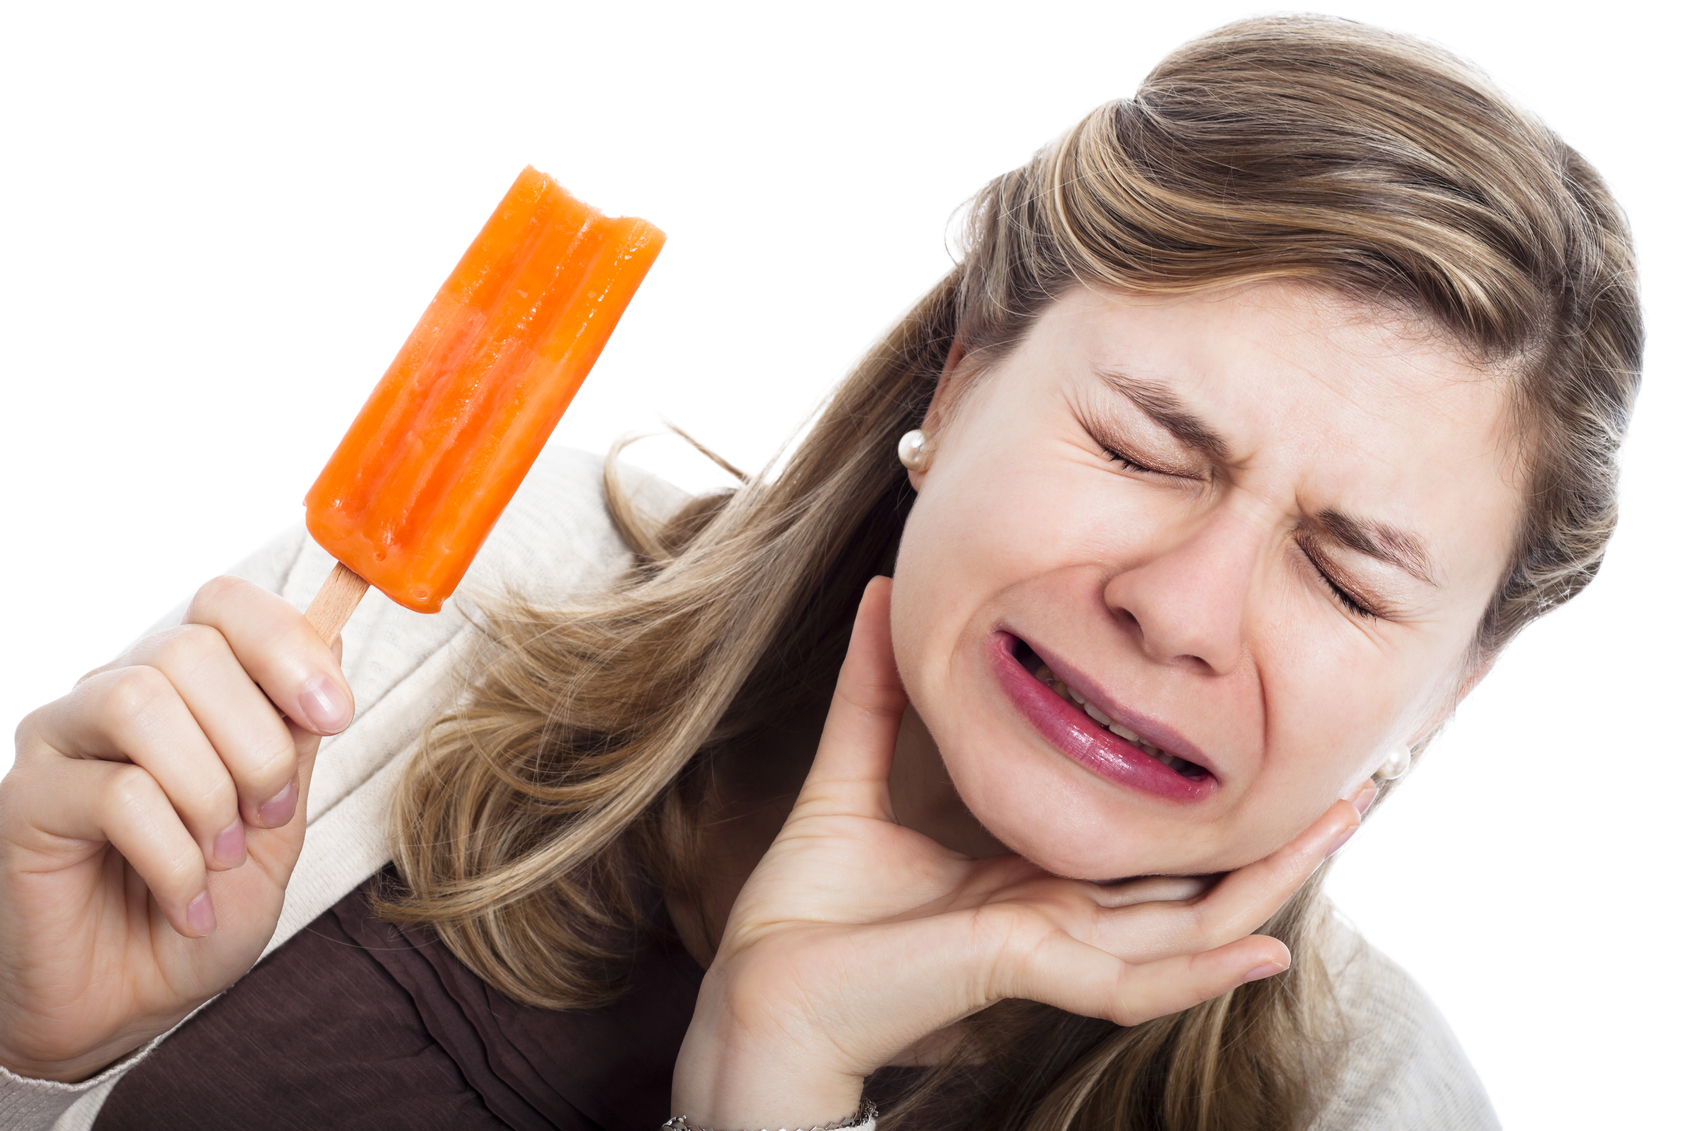 Tooth Sensitivity from teeth grinding